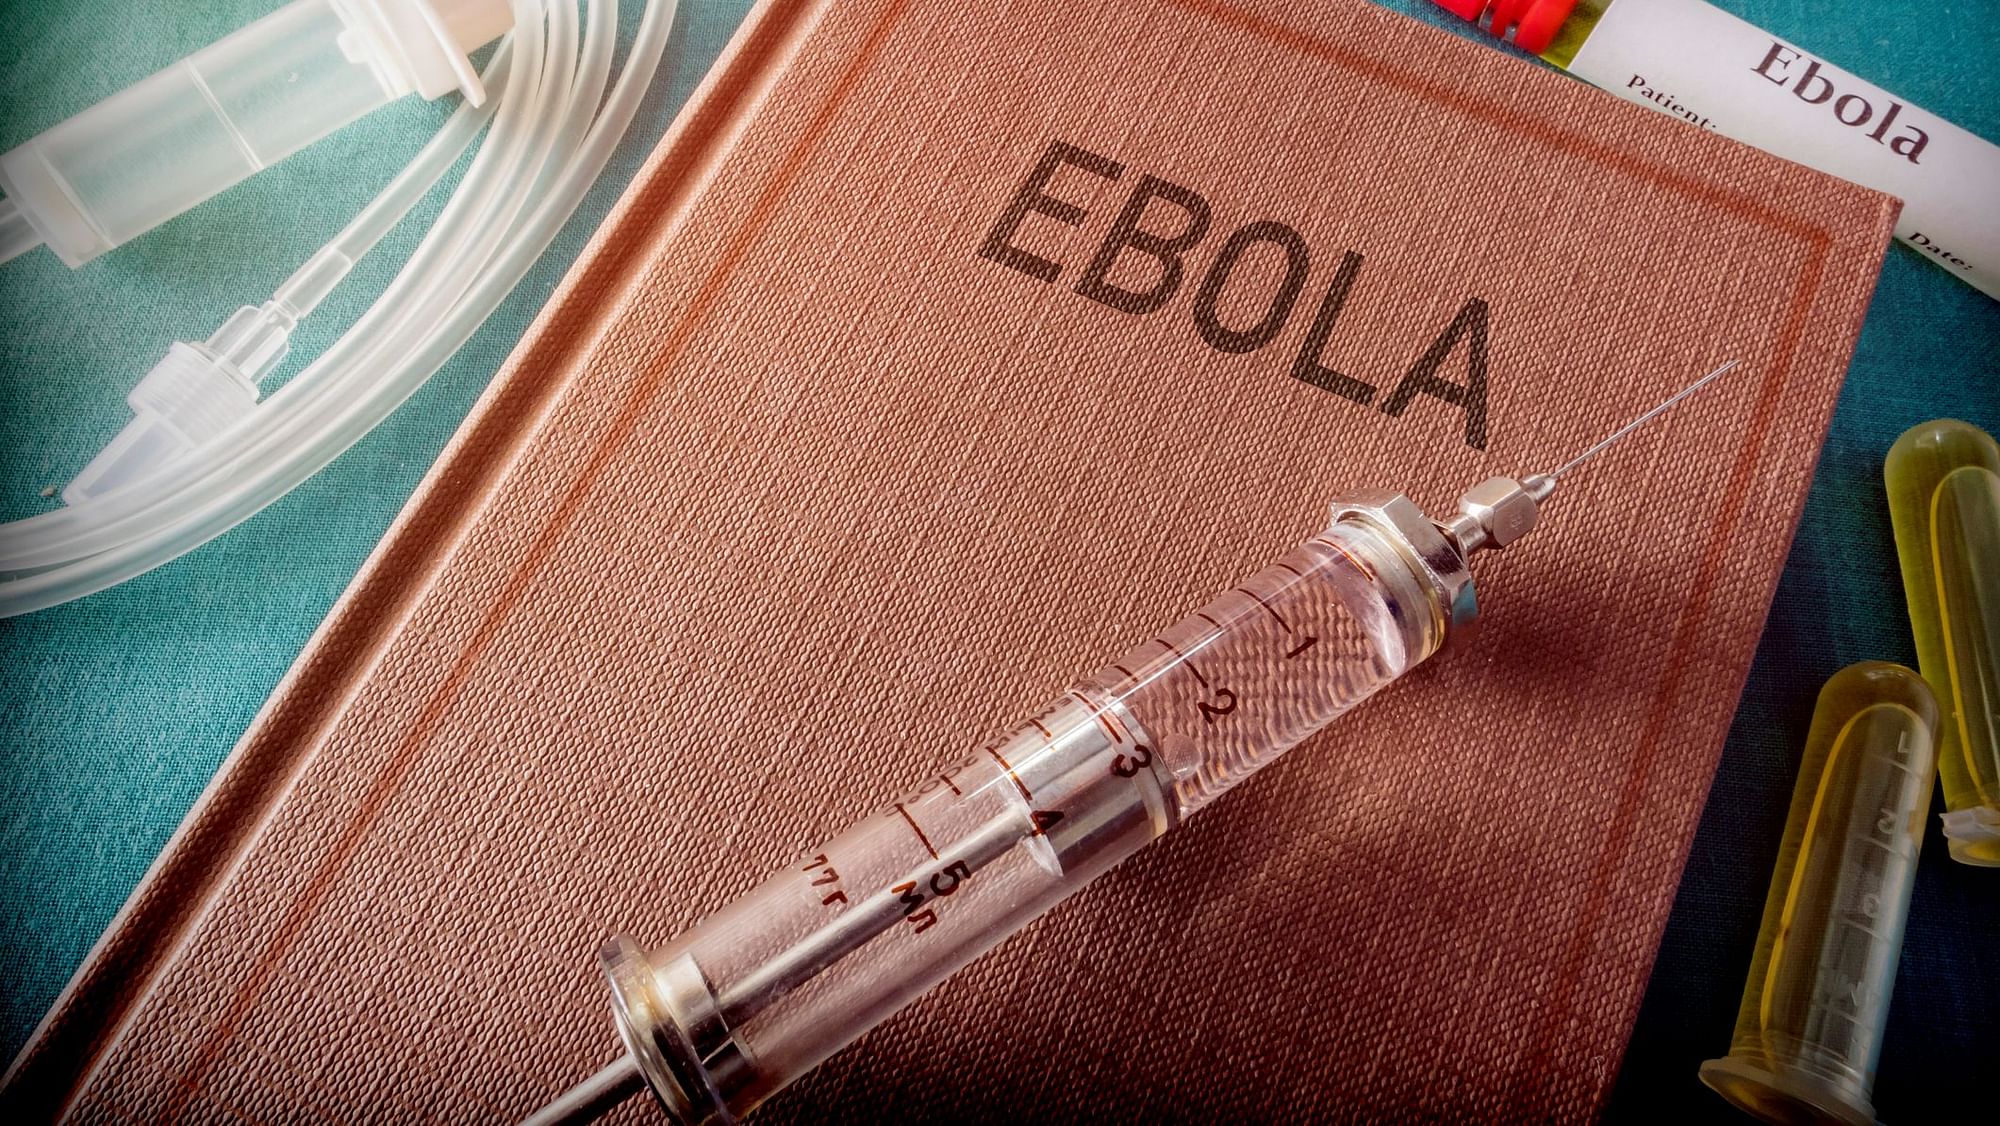 Our experimental drug can protect against all forms of Ebola known to harm people, suggesting that it will continue to protect people if the Ebola viruses evolve over time, say scientists.